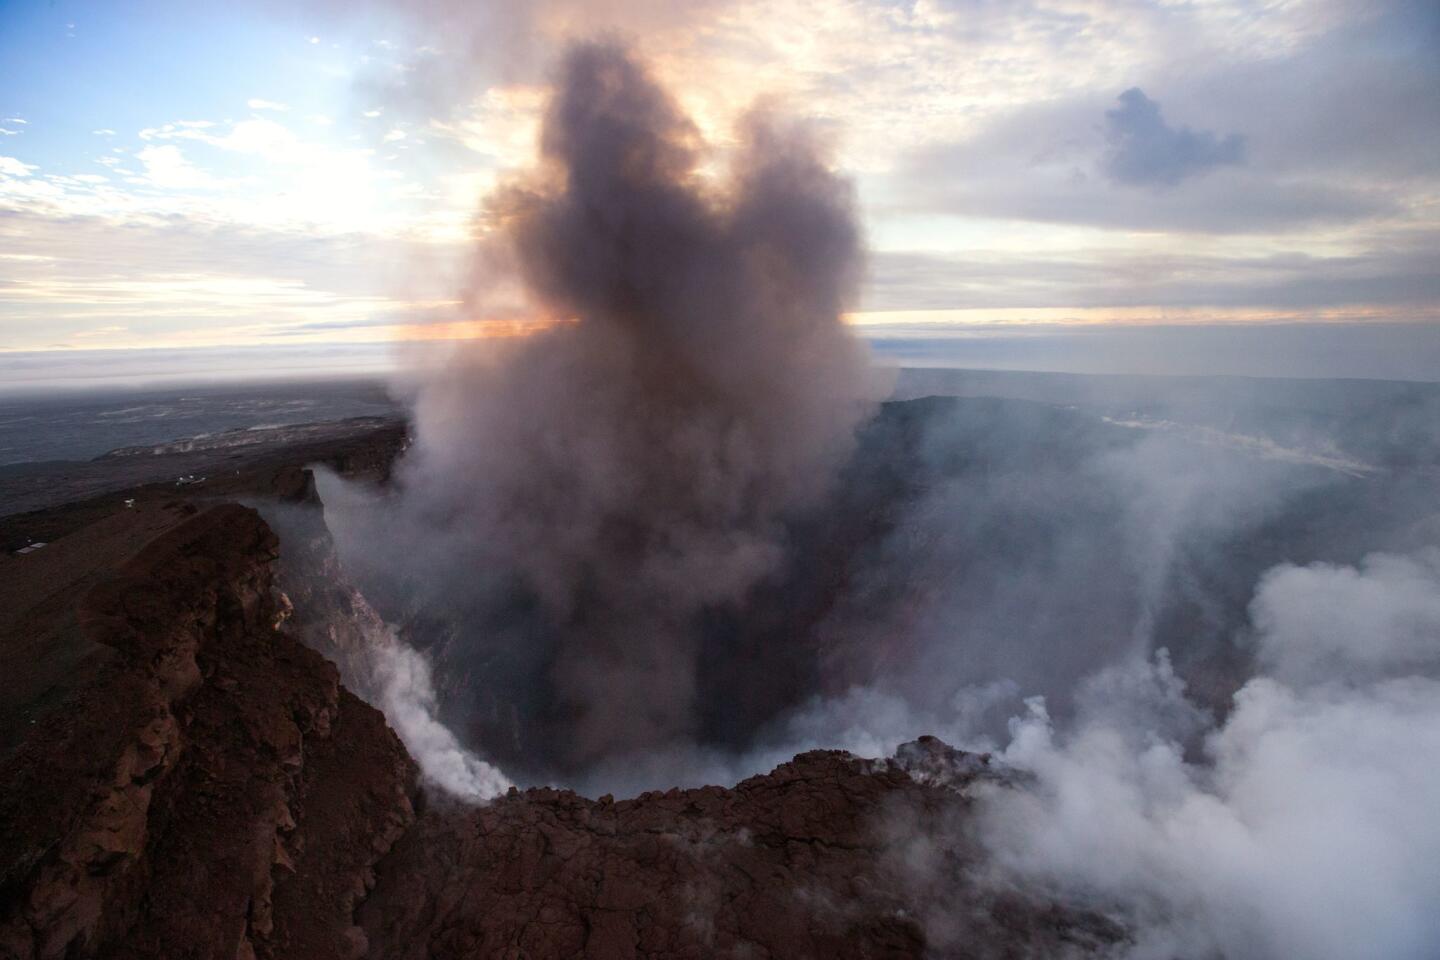 An aerial view shows smoke rising from the Puu Oo crater on the Big Island of Hawaii.